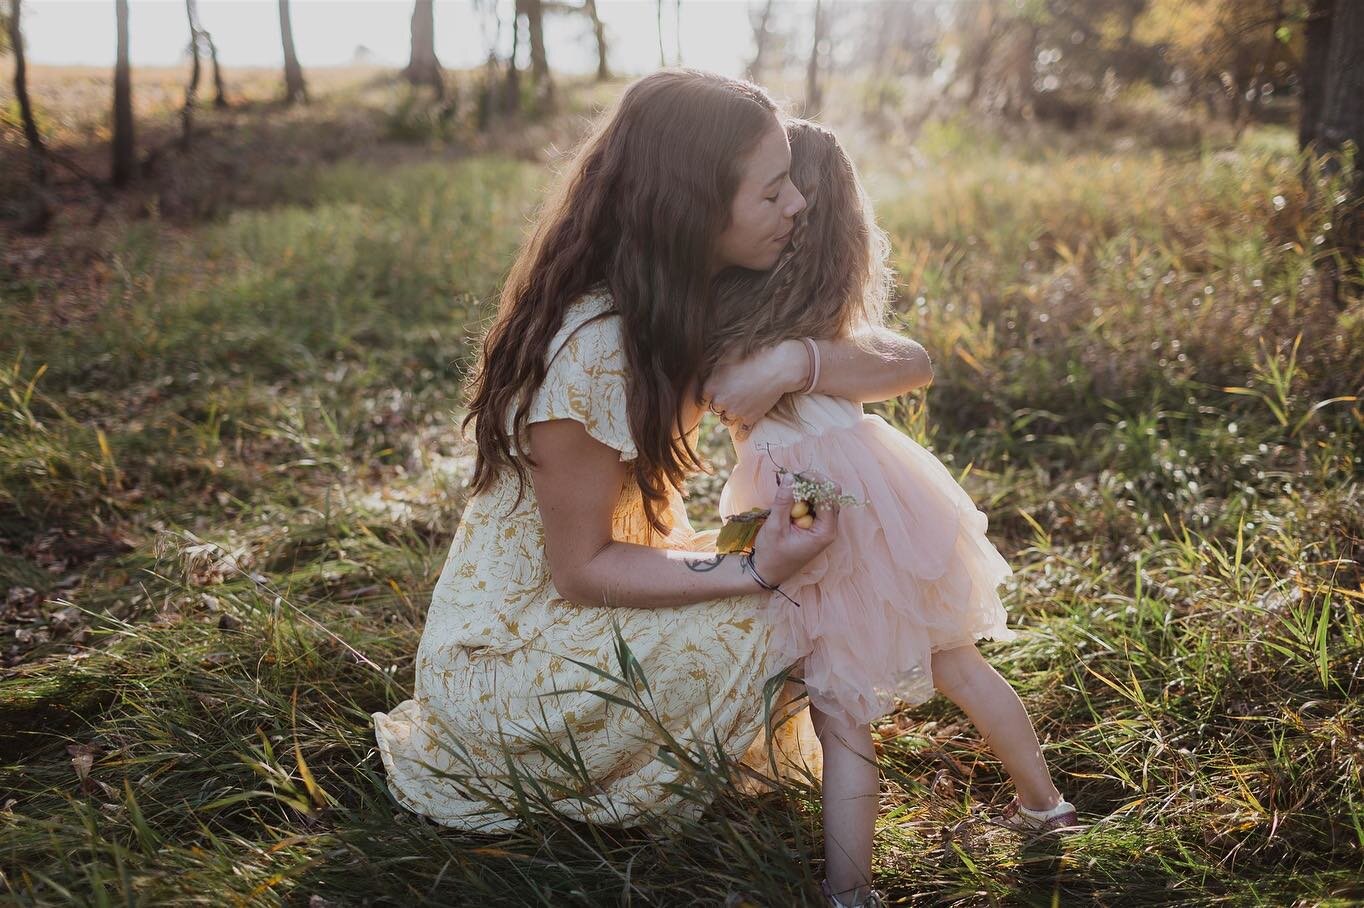 An ode to Motherhood

Over the past few years, I've had the pleasure of watching my dear friend raise this silly little girl. Kayla is one of the best advocates of Motherhood I know. She is selfless and caring. She seeks deep purpose in her relations